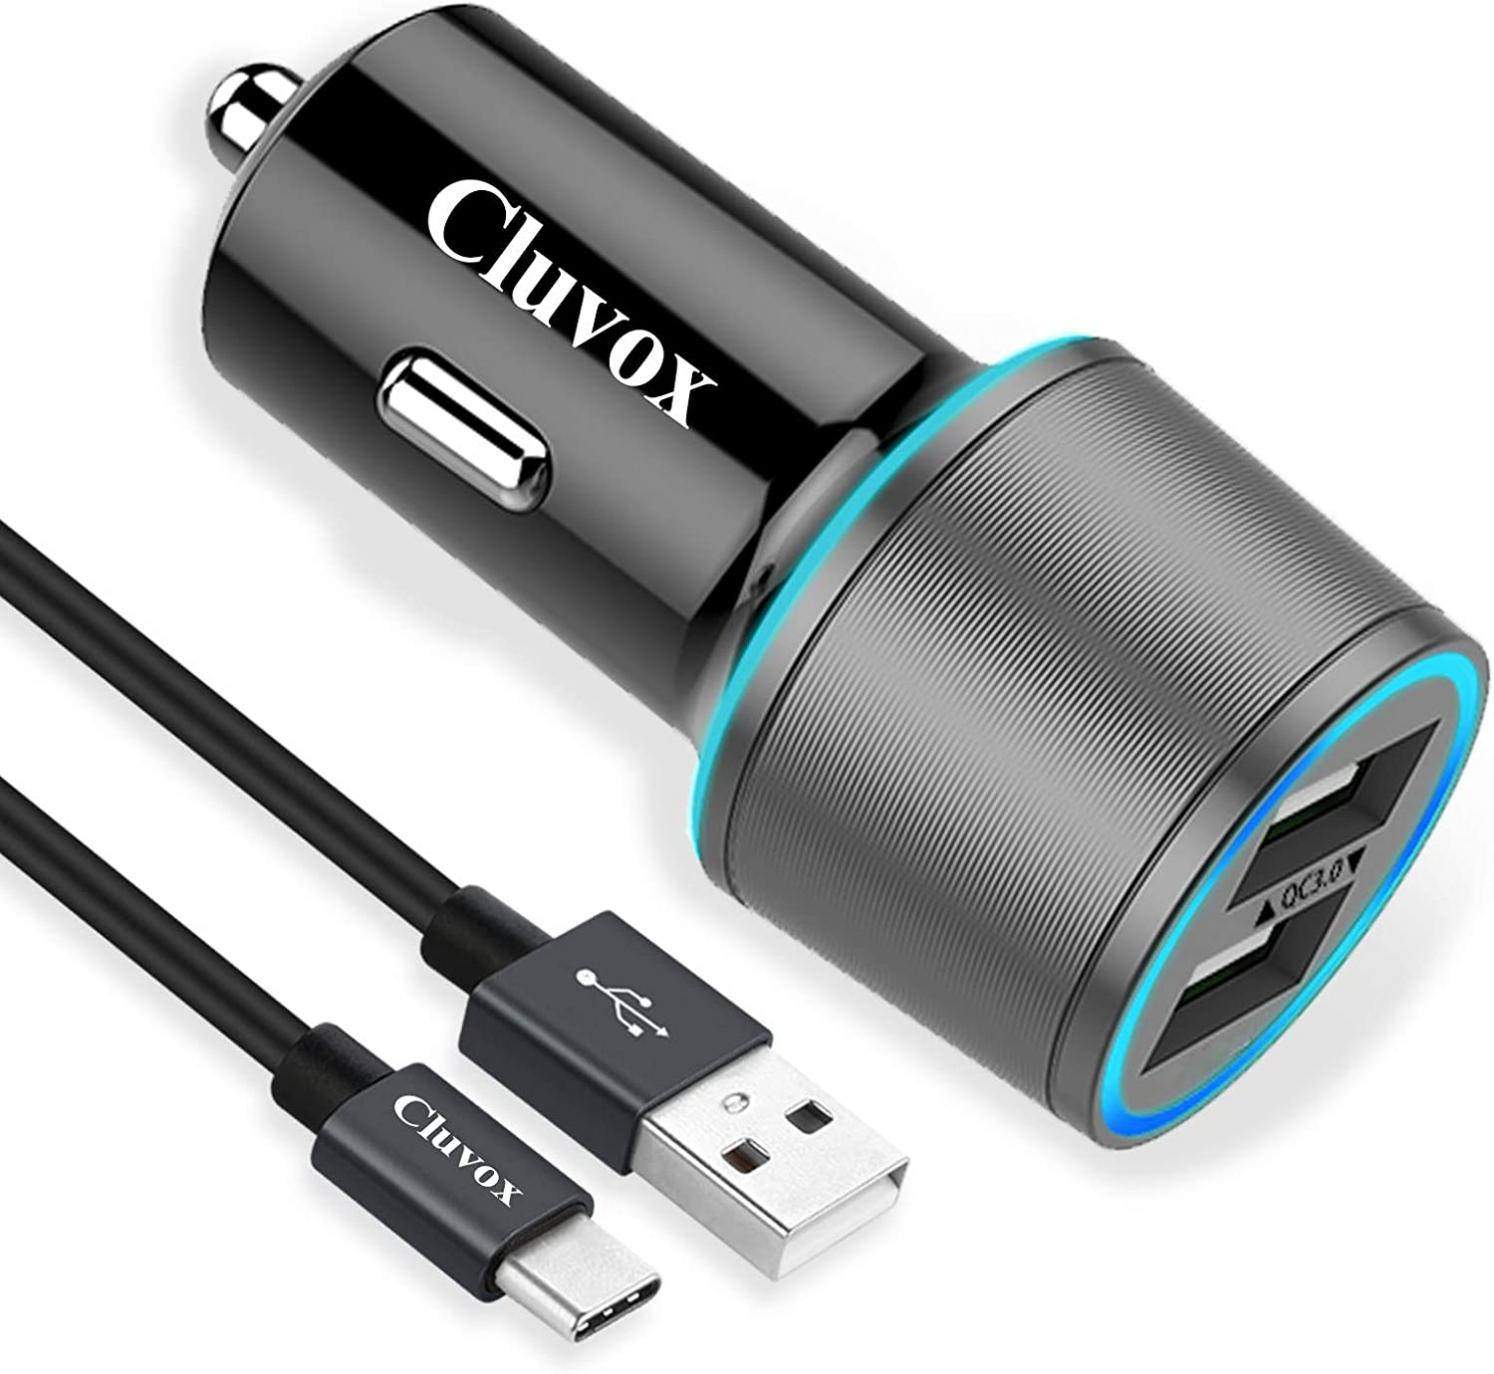 Rapid USB C Car Charger, Compatible for Samsung Galaxy S22/S21/Note 20/Ultra/10/Plus/9/8/S20 Plus/Ultra/S10+/S10e/S9/S8/A50/A70, Quick Charge 3.0 Dual USB 18W Fast Car Charger with Type C Cable 3.3ft